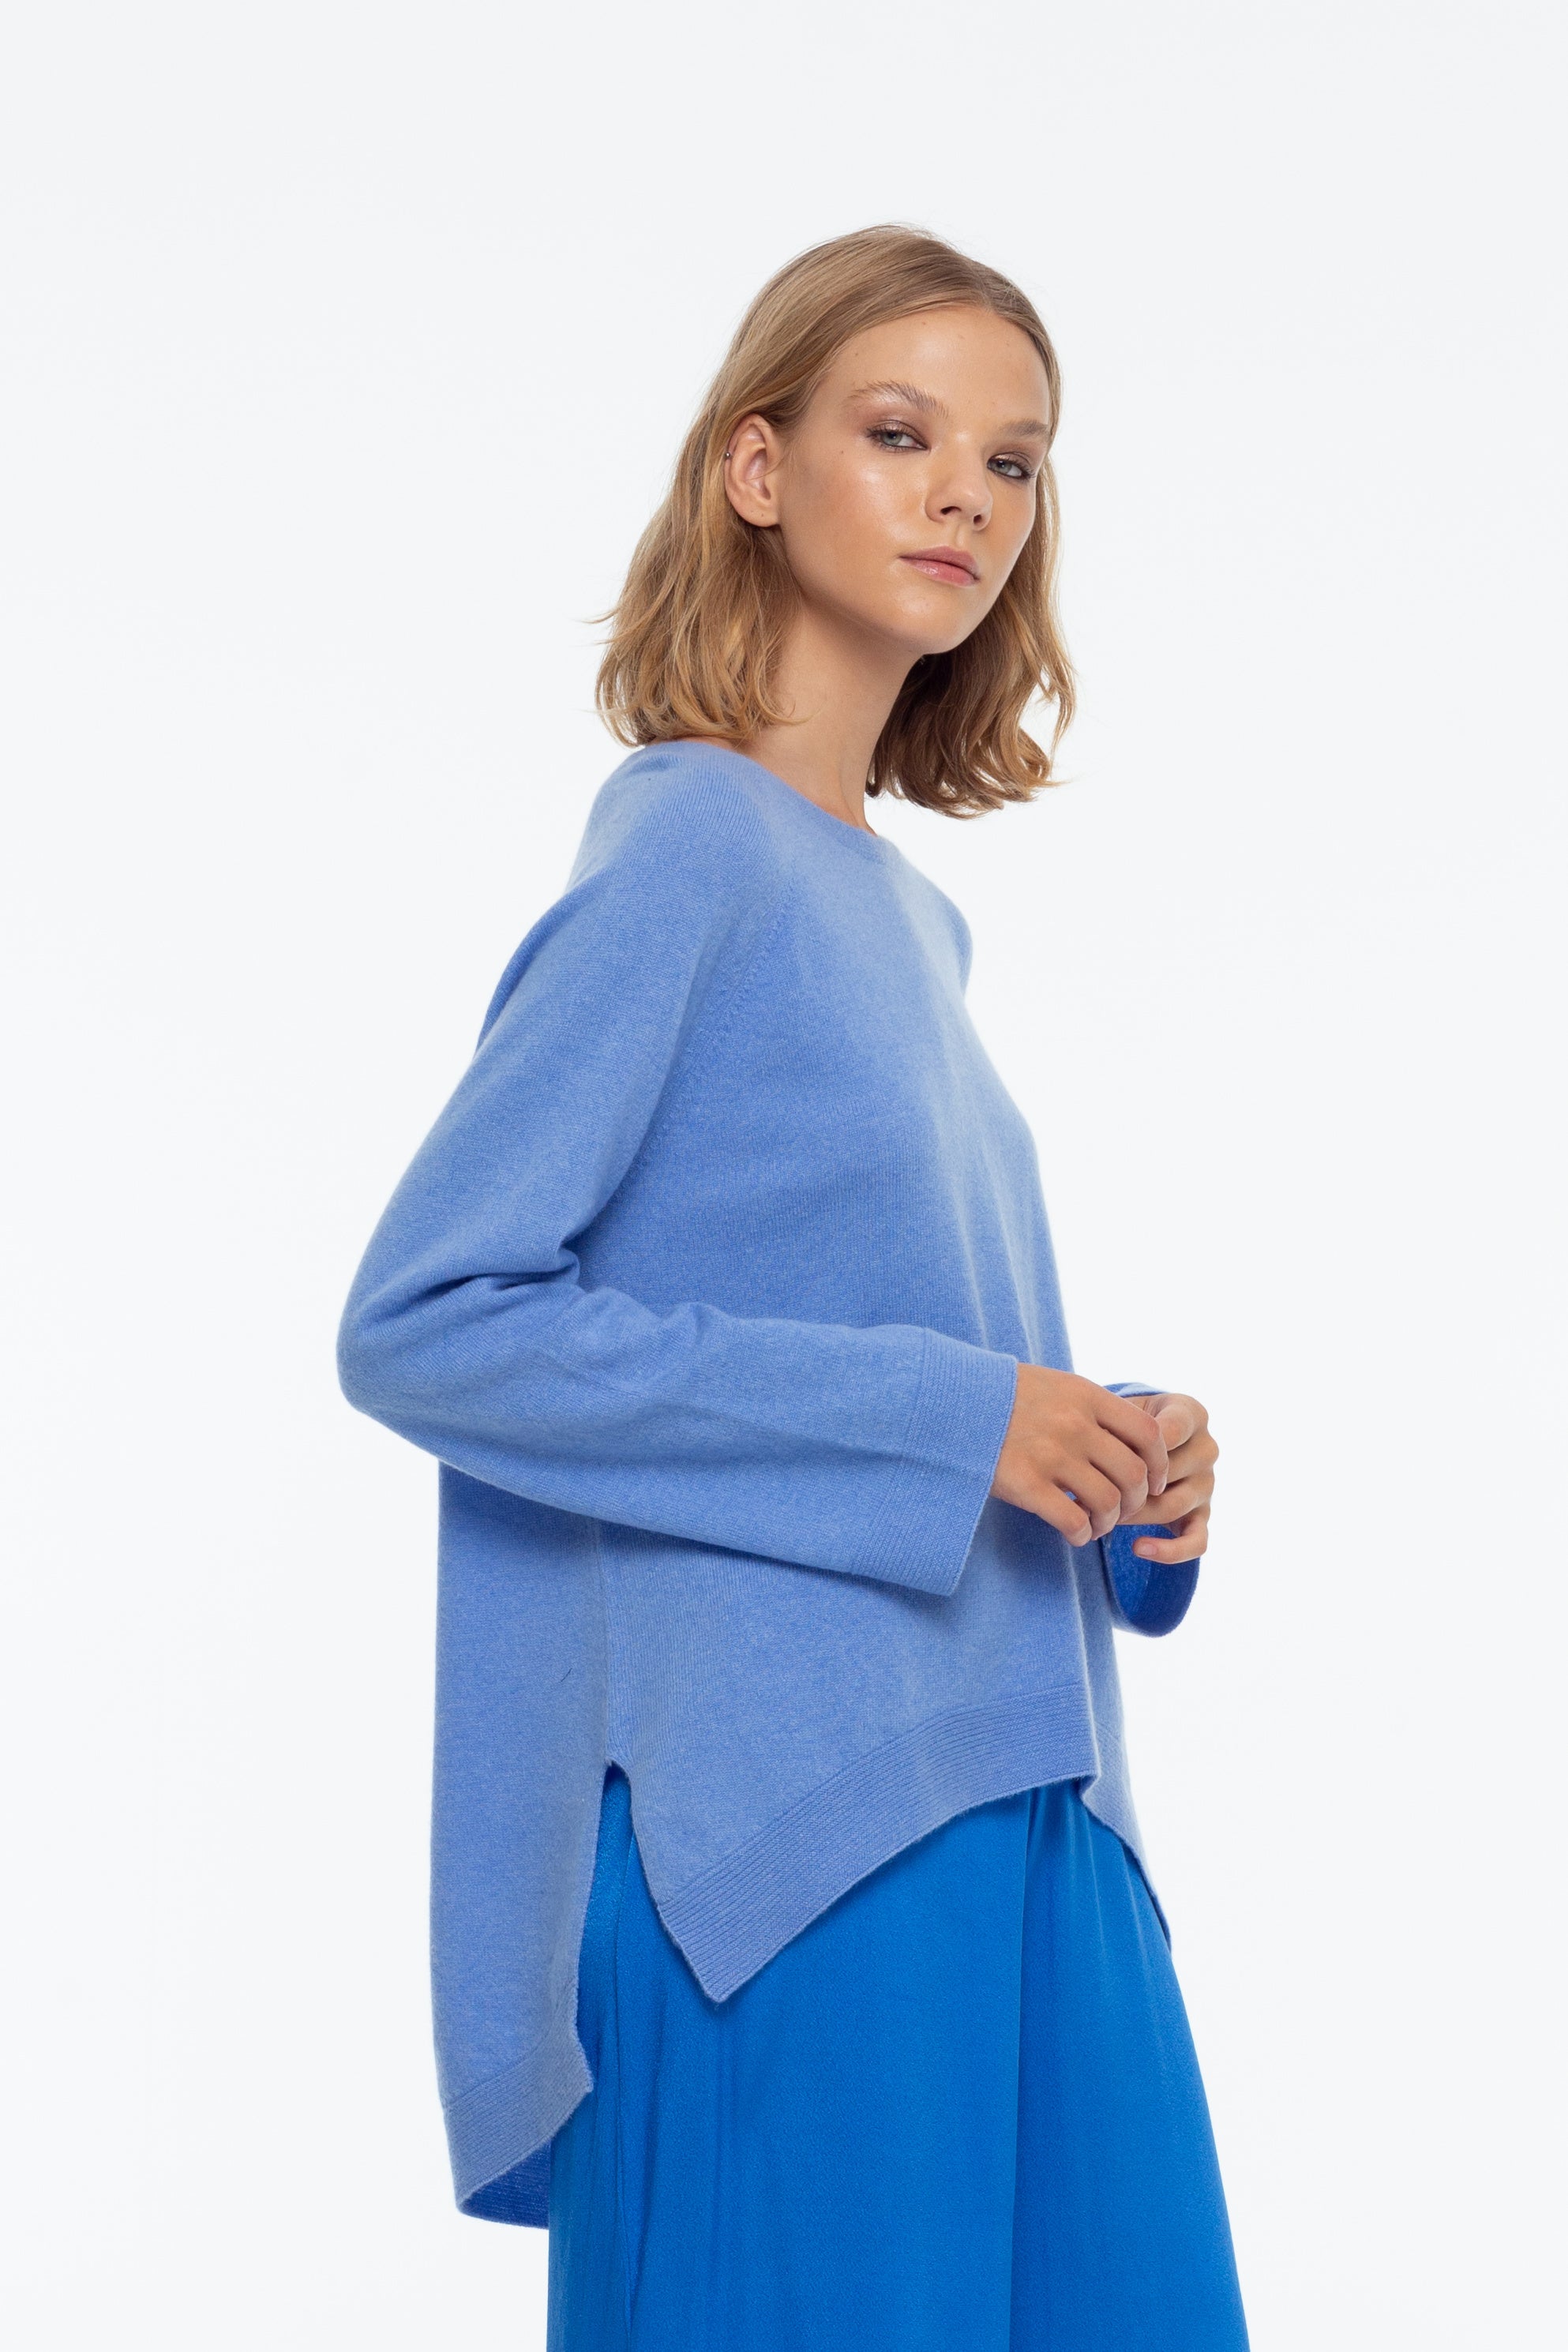 relaxed fit cashmere sweater